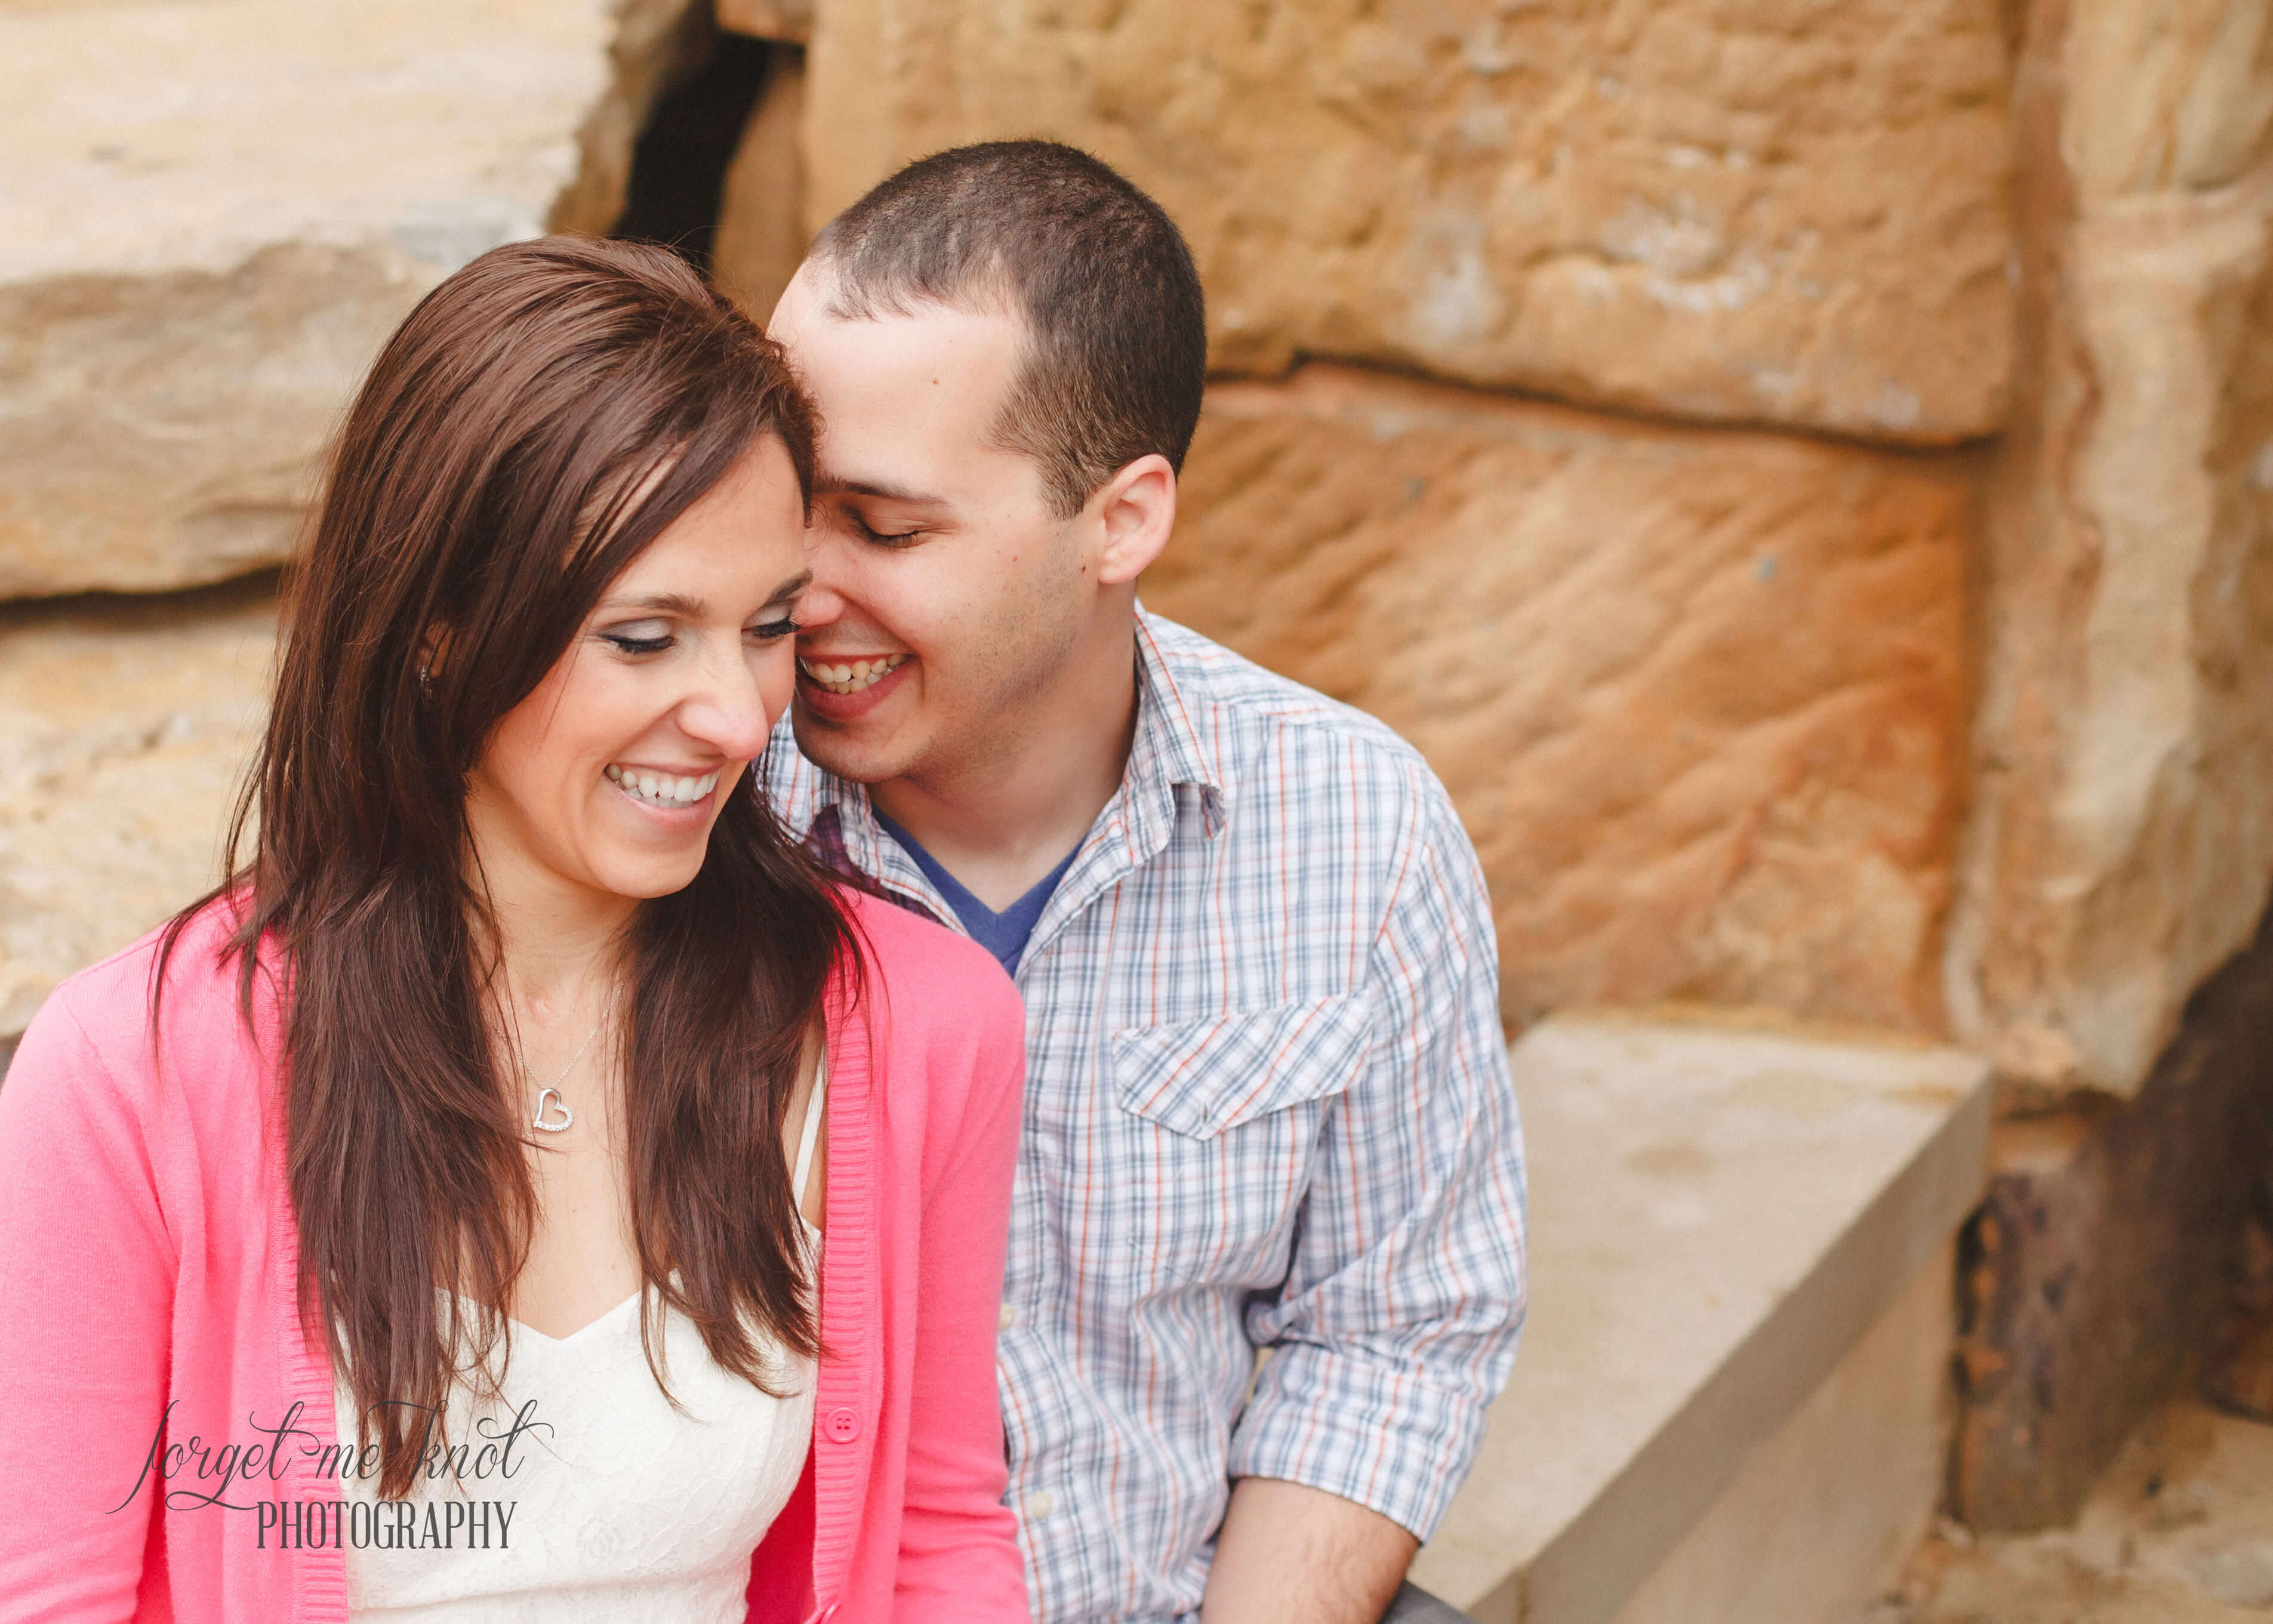 Michelle + Jesse // Easton Town Center Engagement // Wedding Photography Columbus Ohio // Forget Me Knot Photography